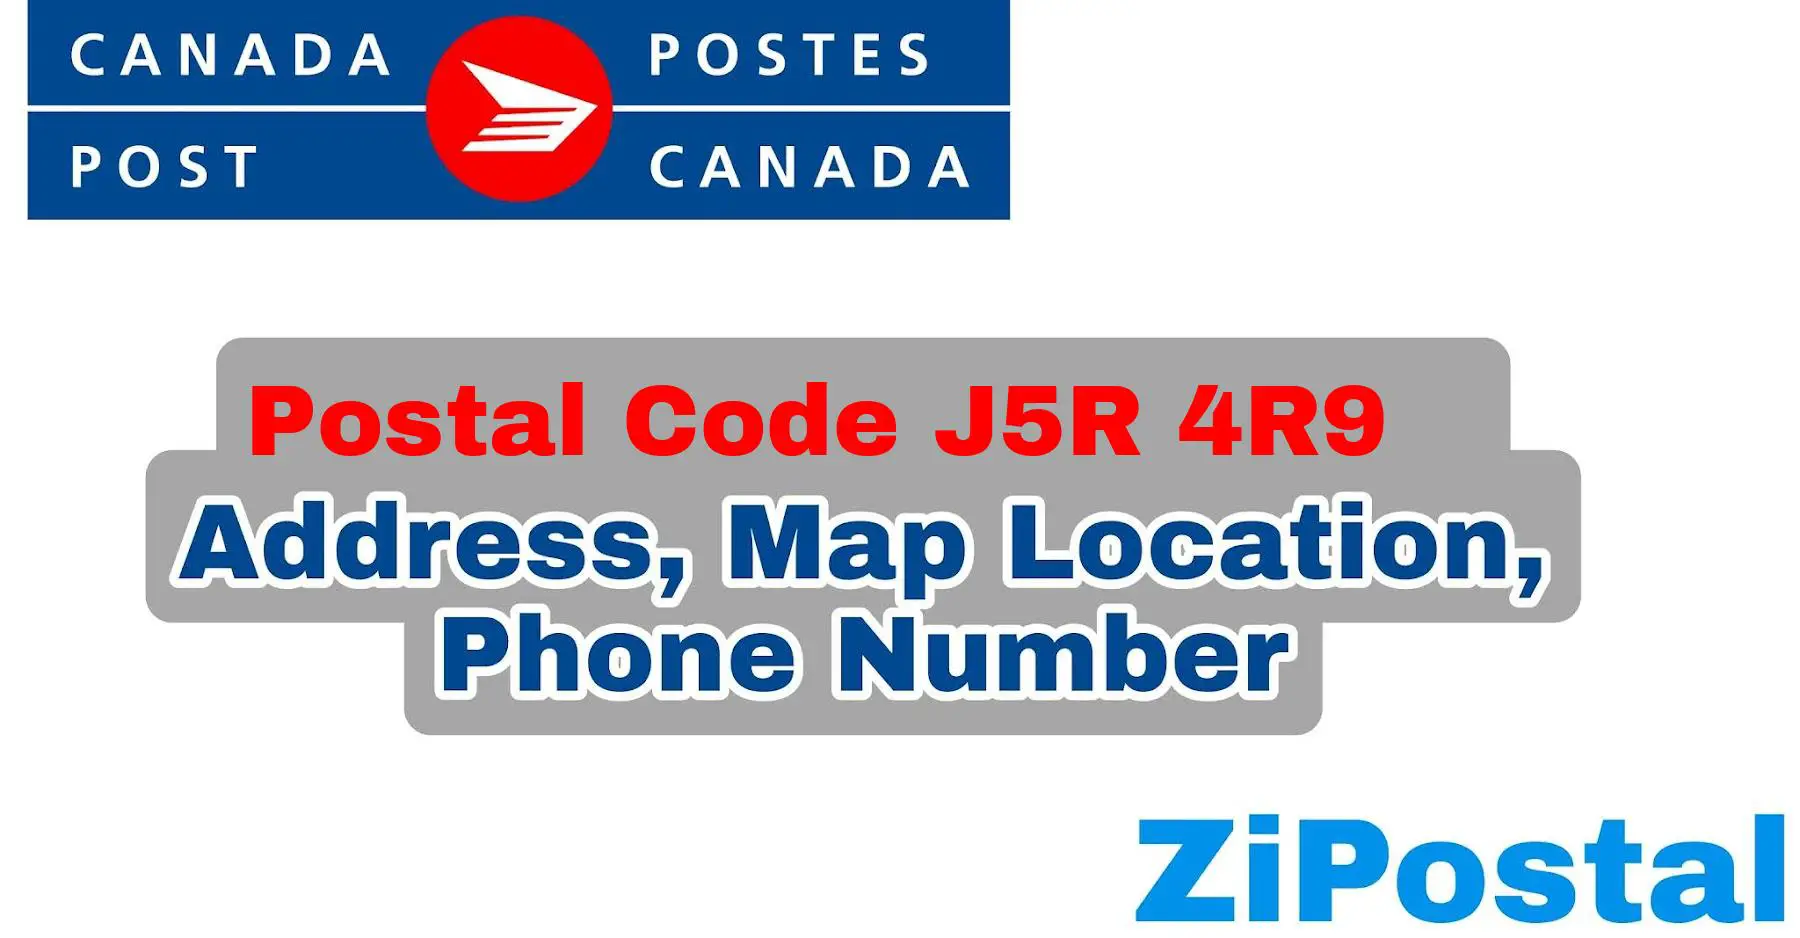 Postal Code J5R 4R9 Address Map Location and Phone Number